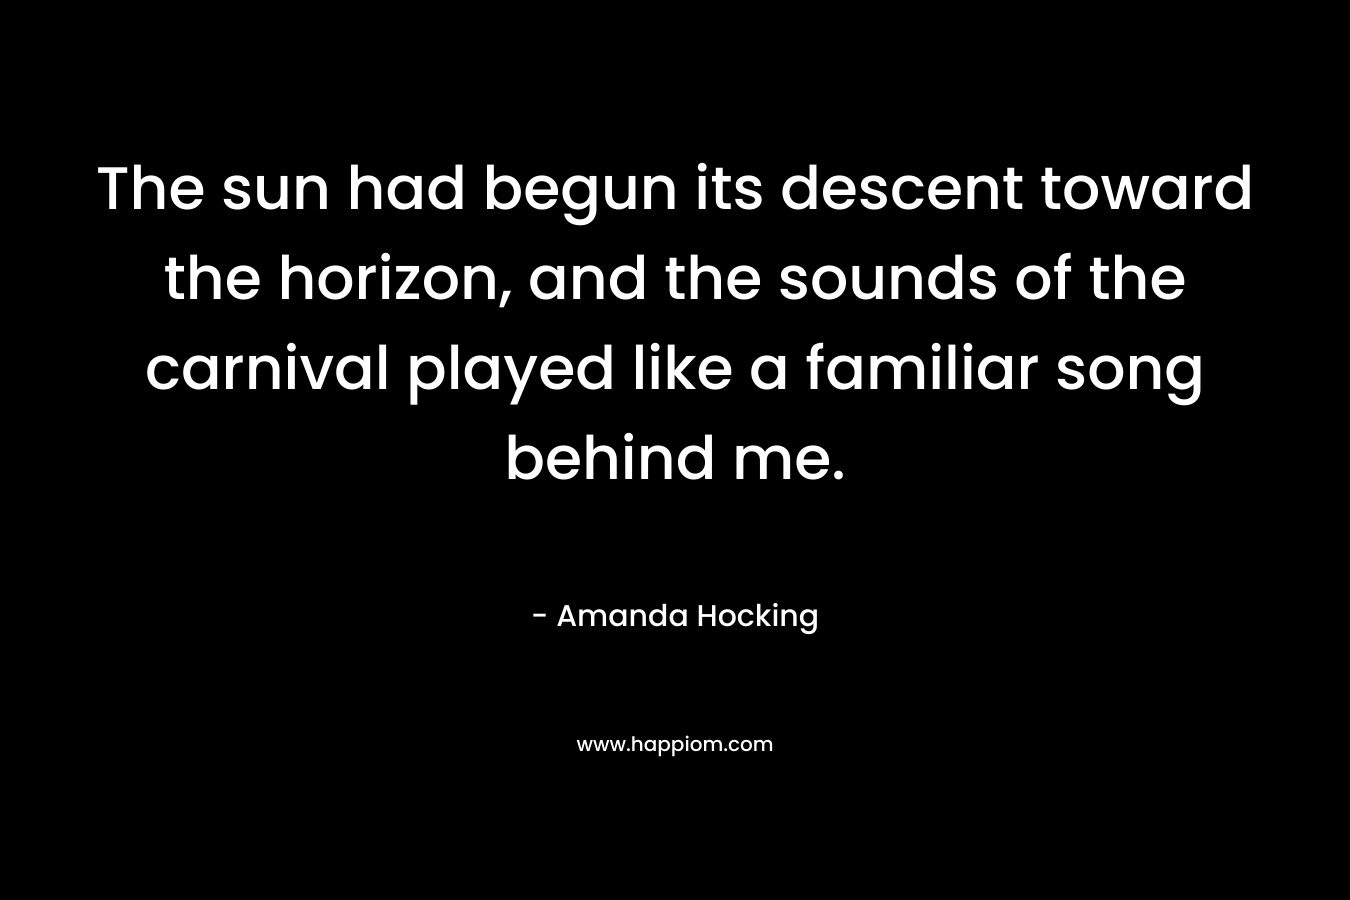 The sun had begun its descent toward the horizon, and the sounds of the carnival played like a familiar song behind me. – Amanda Hocking